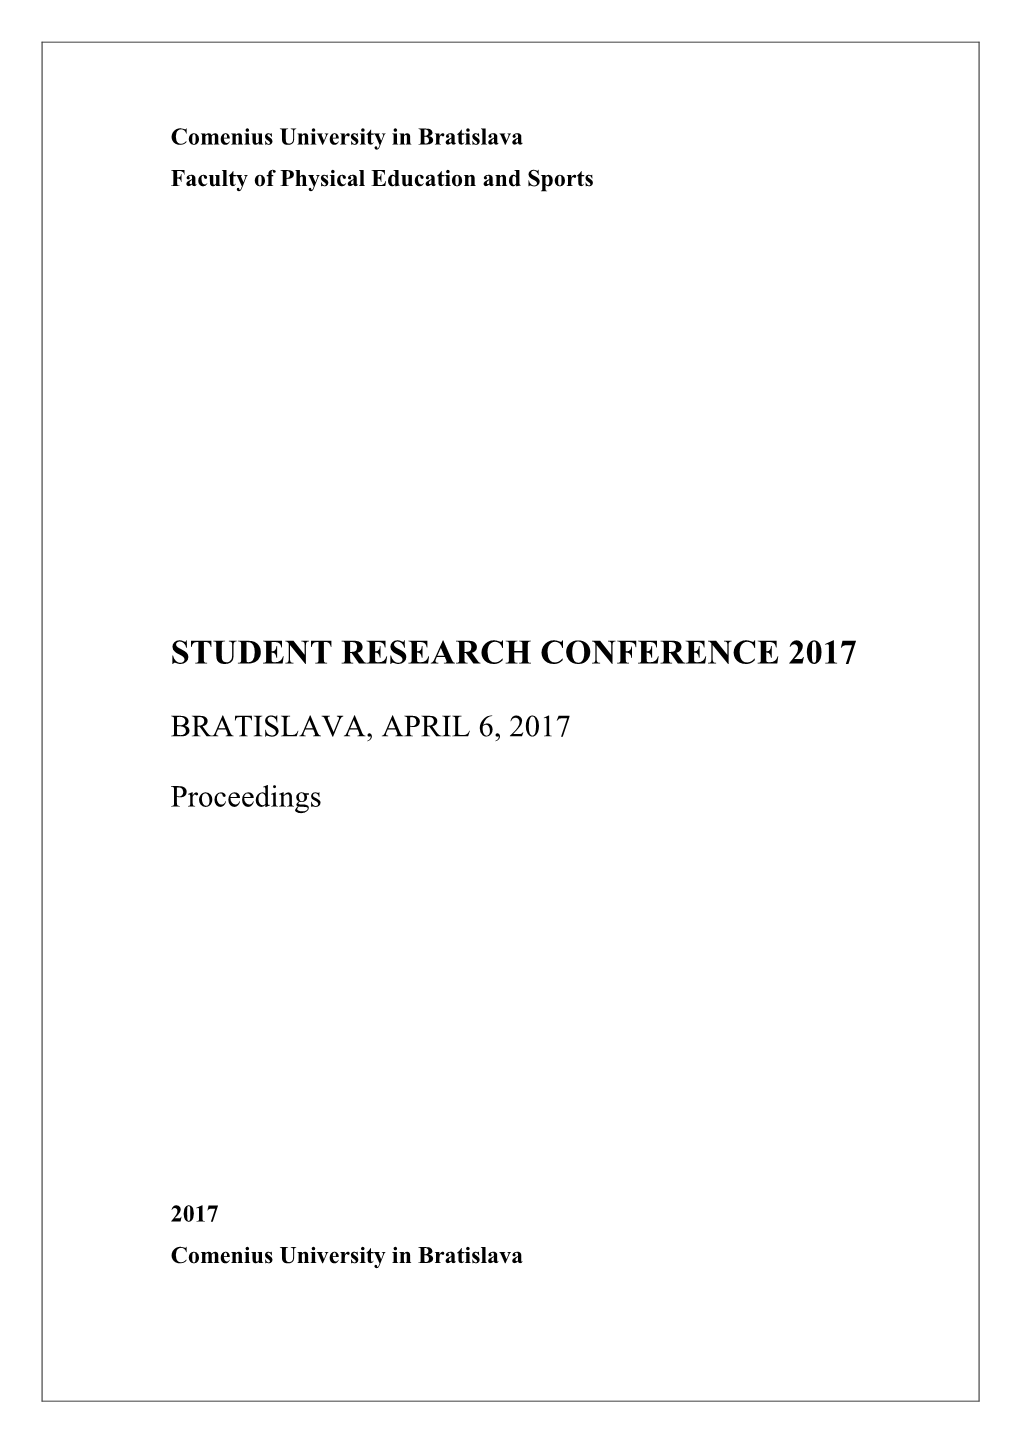 Student Research Conference 2017